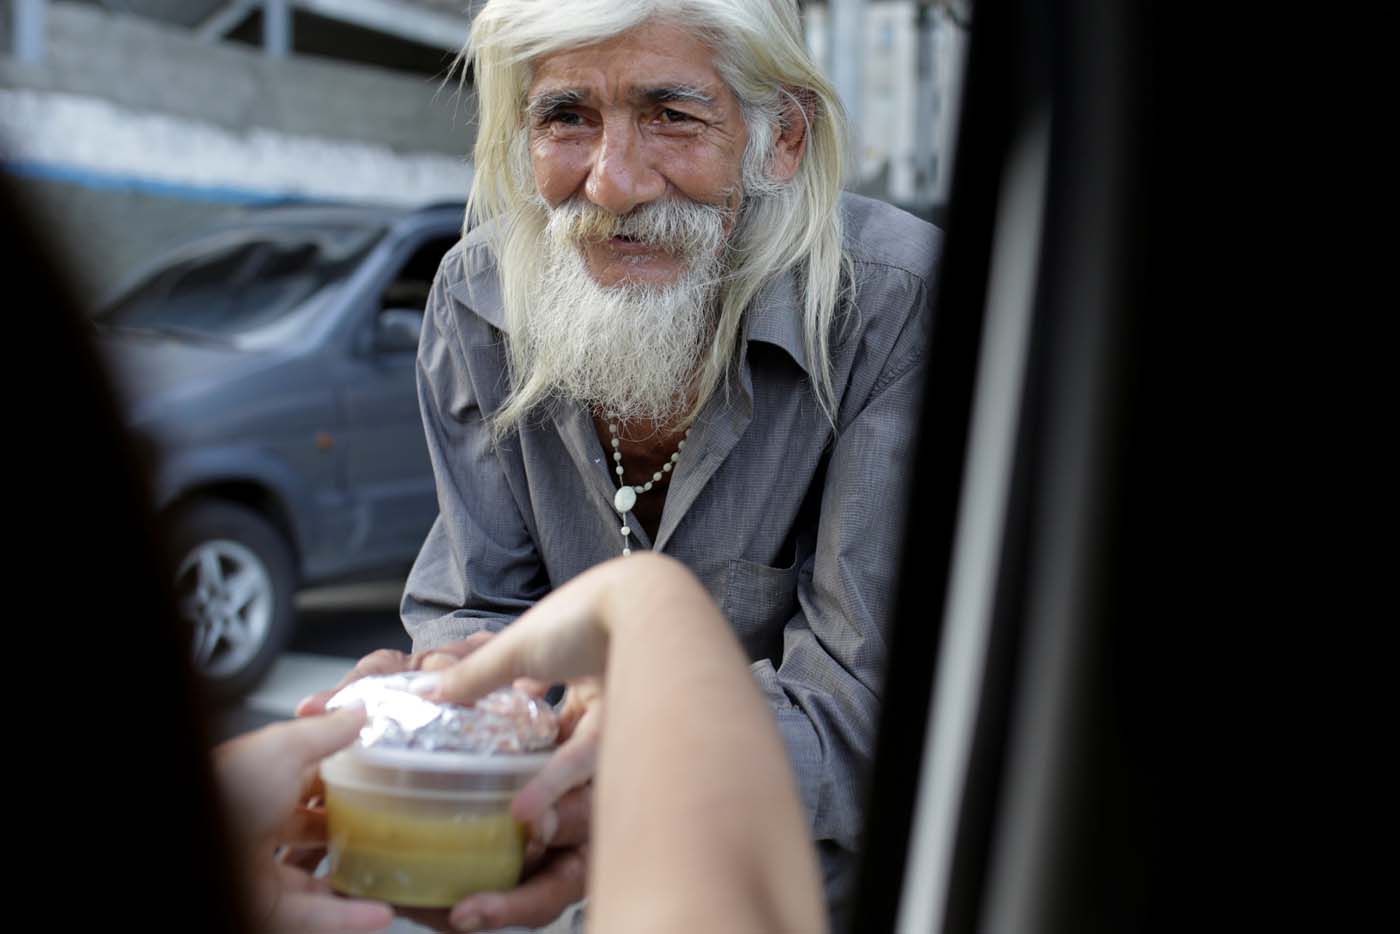 A volunteer of Make The Difference (Haz La Diferencia) charity initiative gives through a car's window a cup of soup to a homeless man in a street of Caracas, Venezuela March12, 2017. Picture taken March 12, 2017. REUTERS/Marco Bello